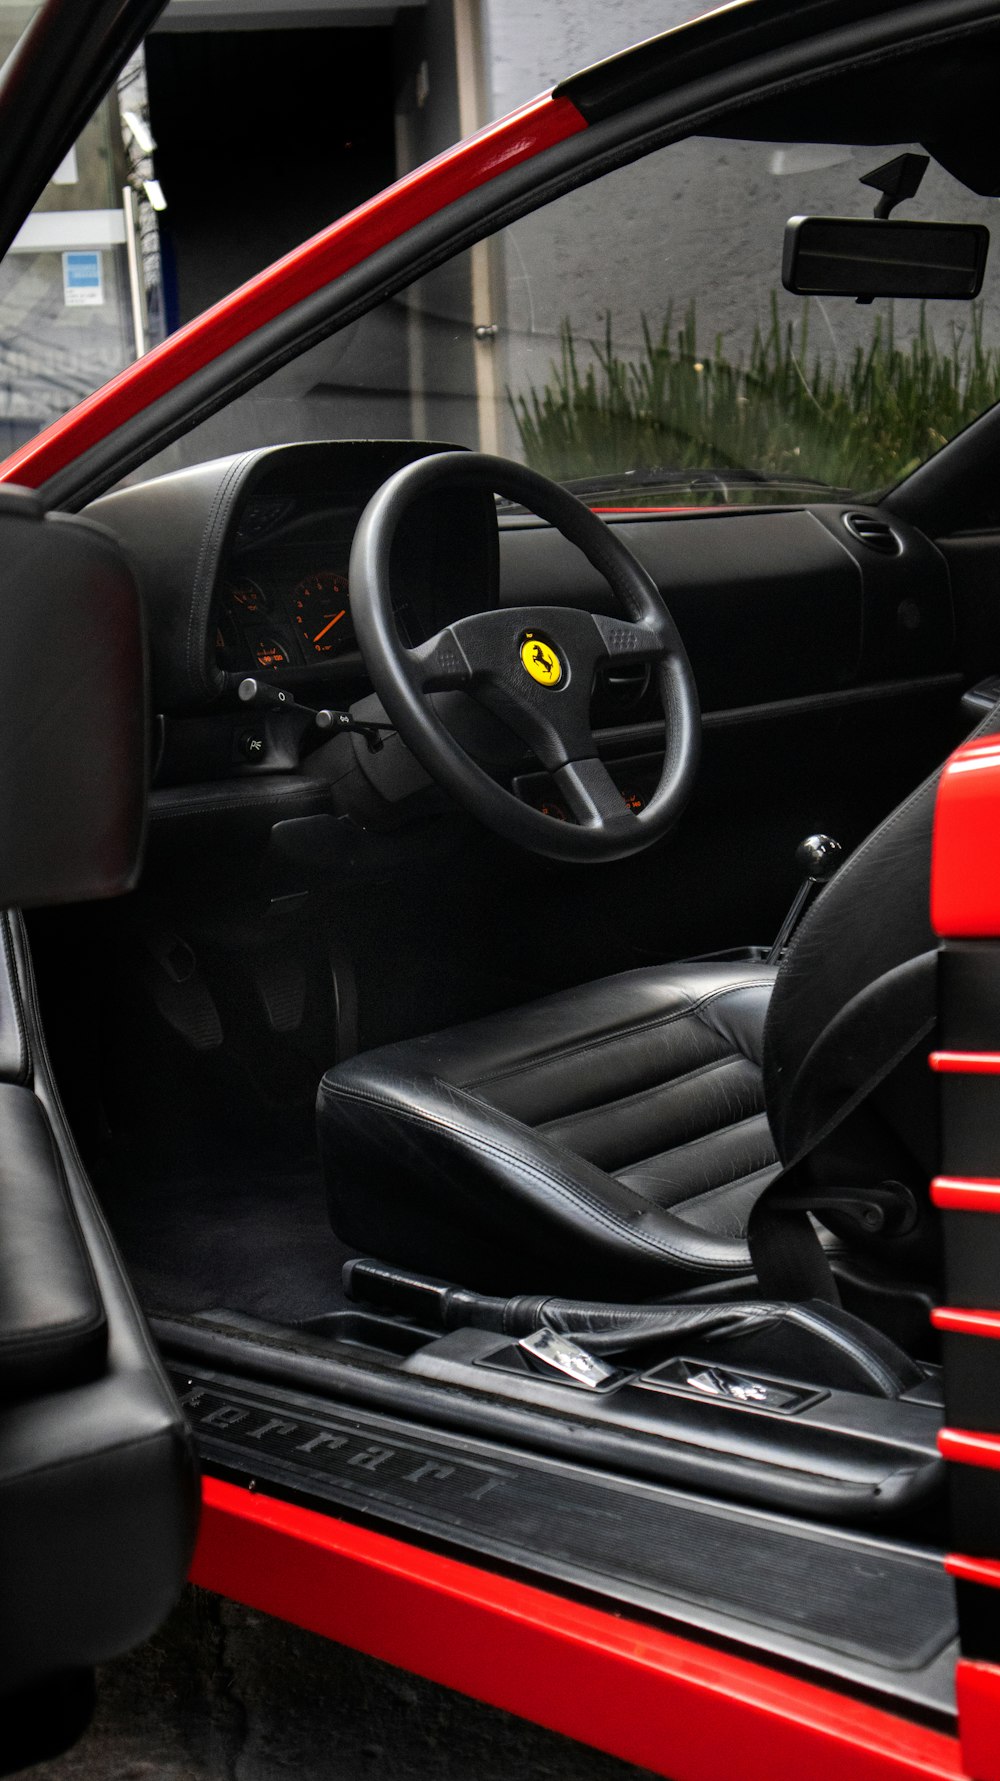 the interior of a red car with black leather seats